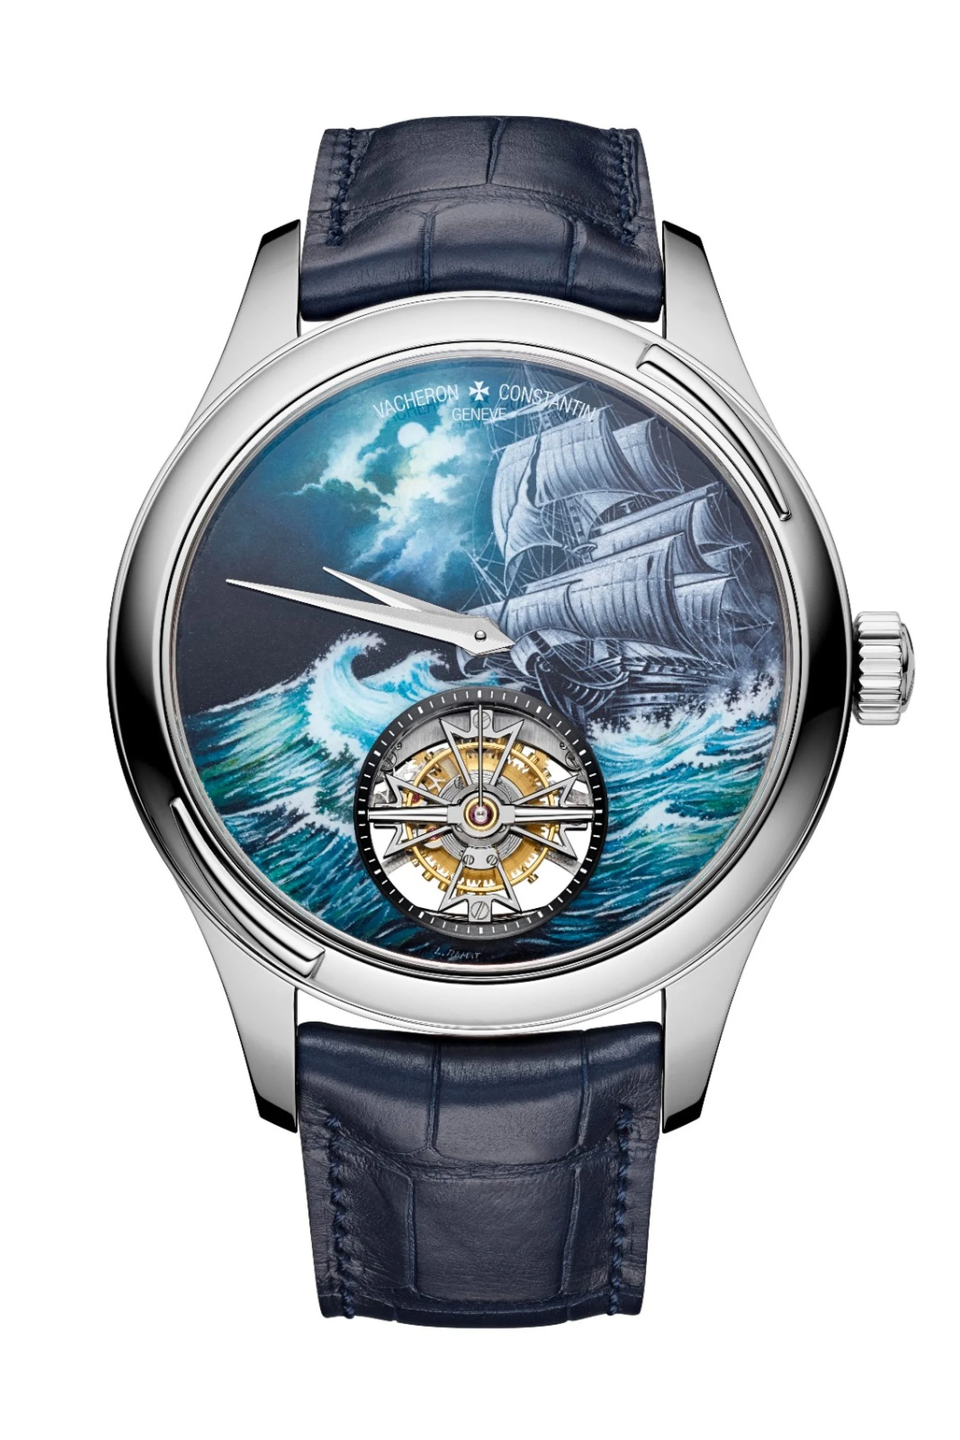 Les Cabinotiers Minute Repeater Tourbillon Flying Dutchman